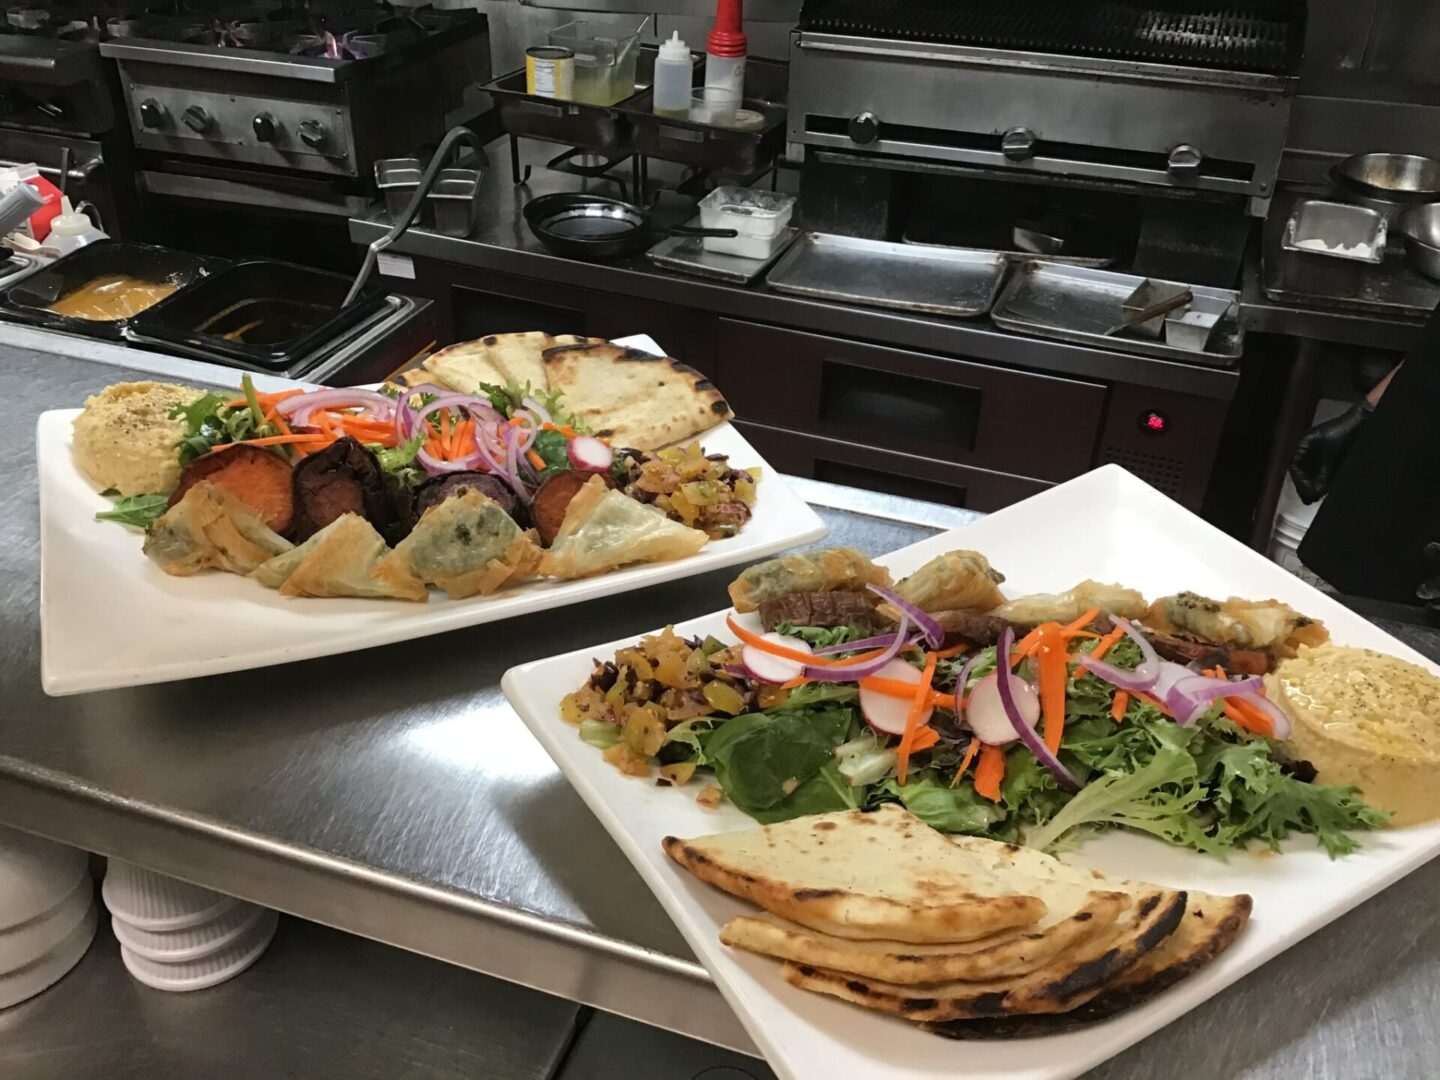 Two platters of flatbread and salad dishes